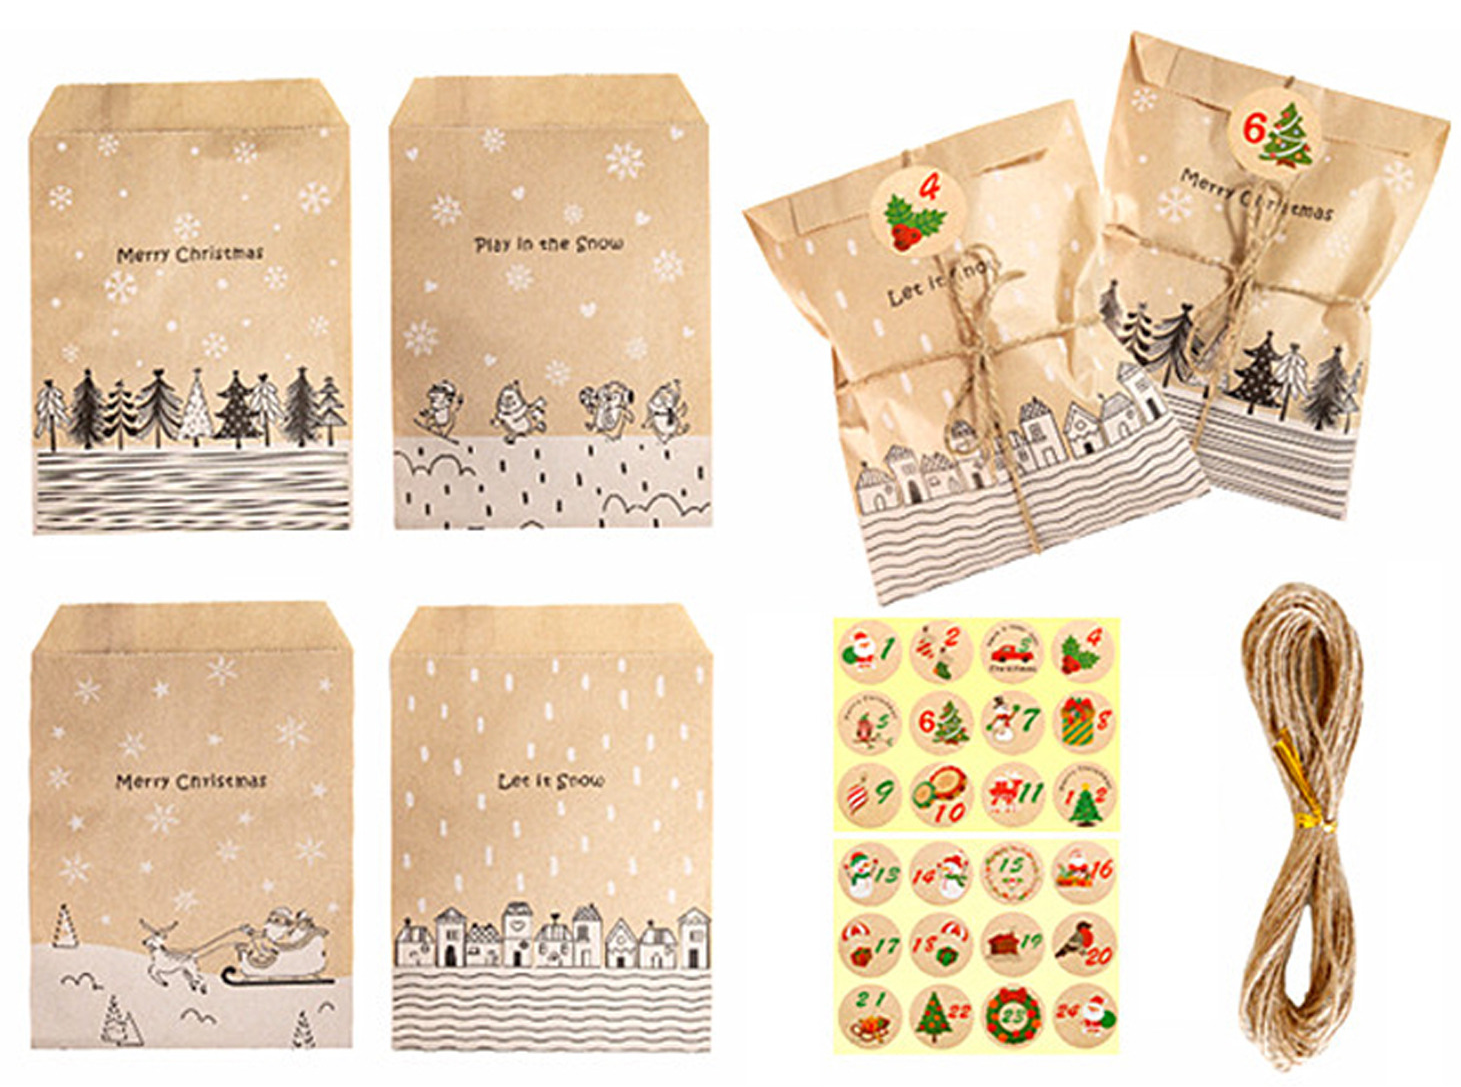 The Range Christmas DIY Advent Calendar Bags and Stickers - 24 Bags / 24